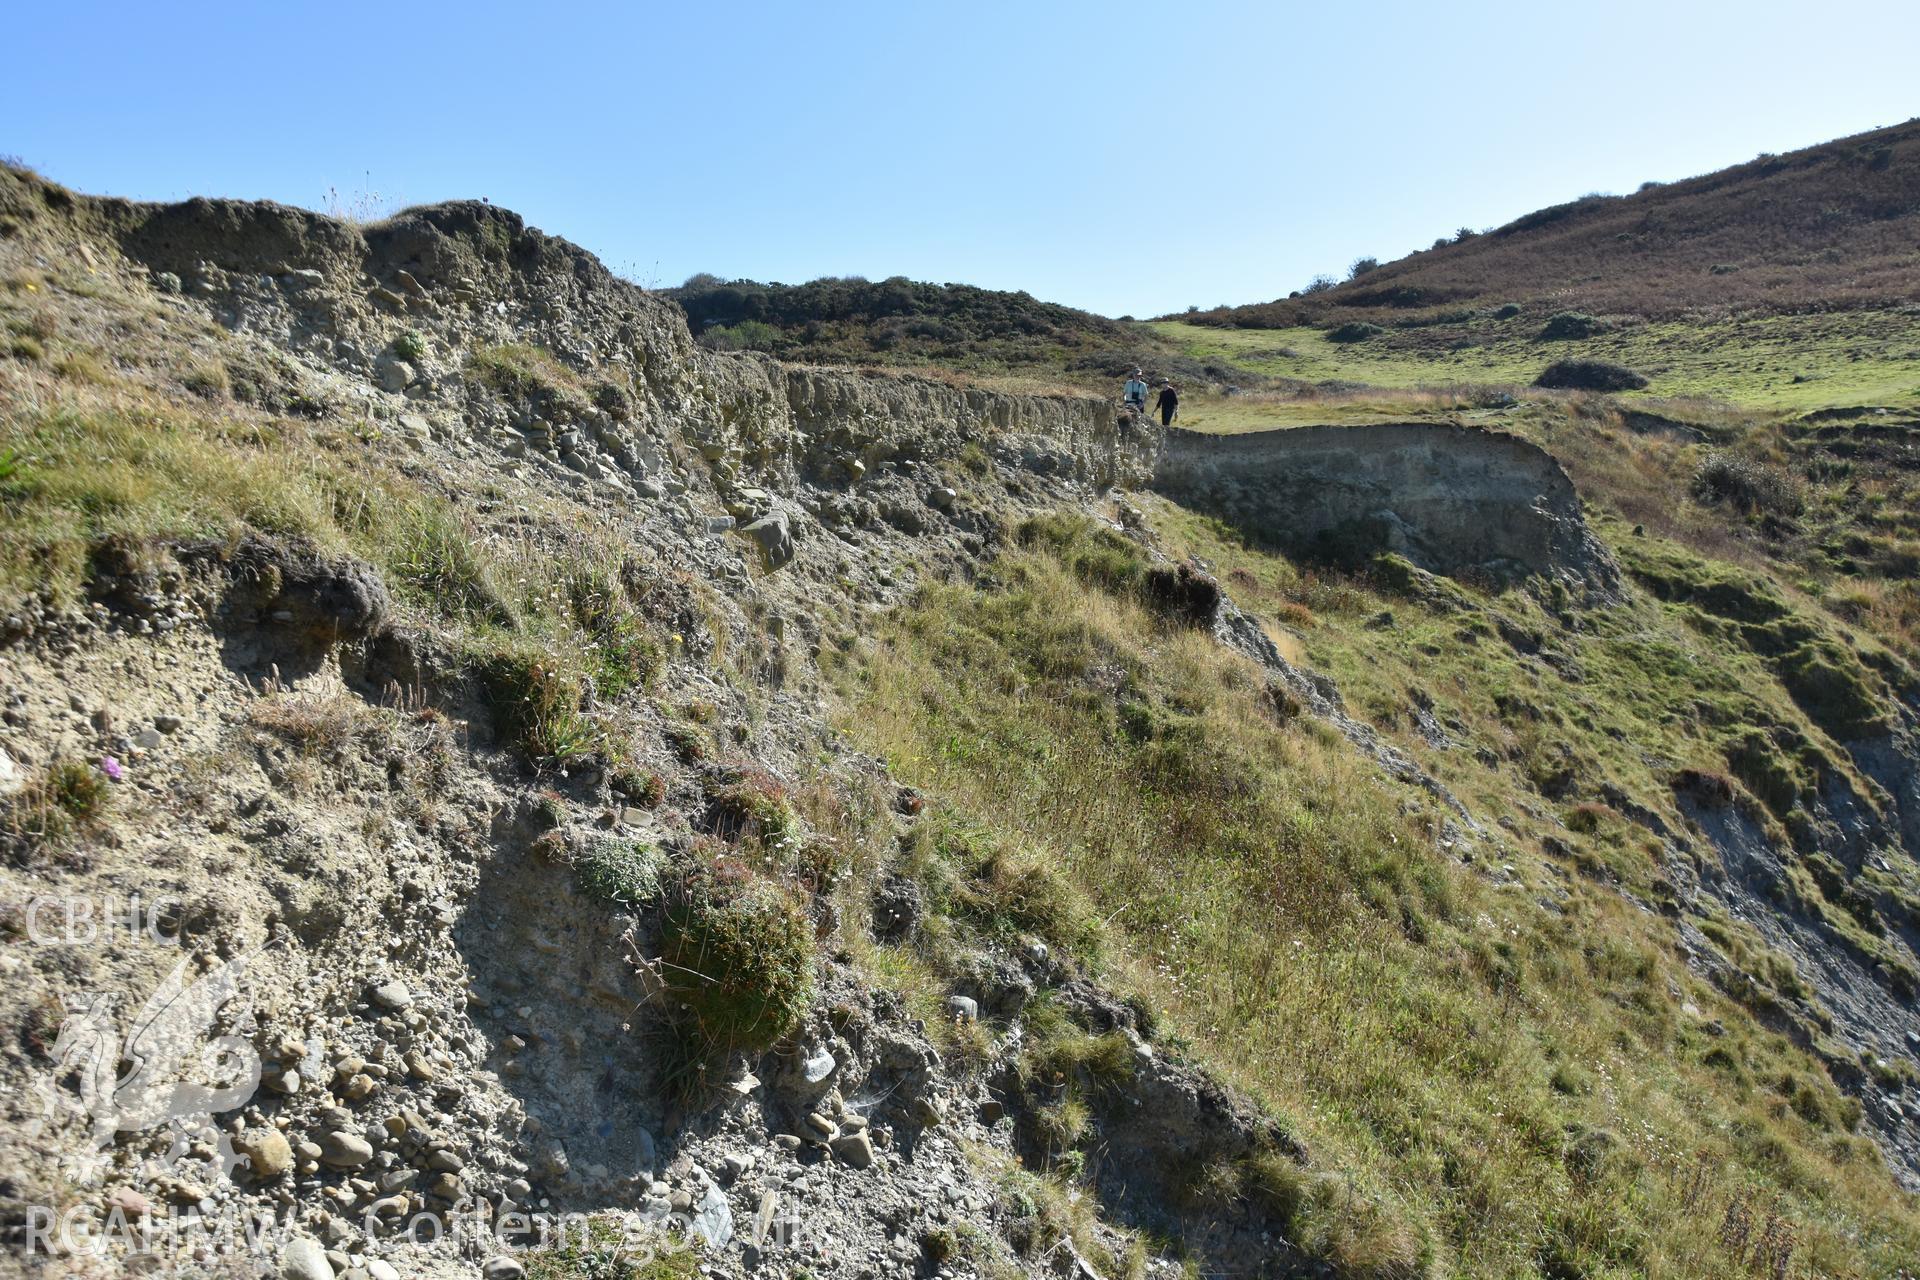 Eroding section. Camera facing S. Survey team in shot. From photographic survey of Castell Bach (NPRN 93914) by Dr Toby Driver for site monitoring 19/09/2019.
Produced with EU funds through the Ireland Wales Co-operation Programme 2014-2020. All material made freely available through the Open Government Licence.